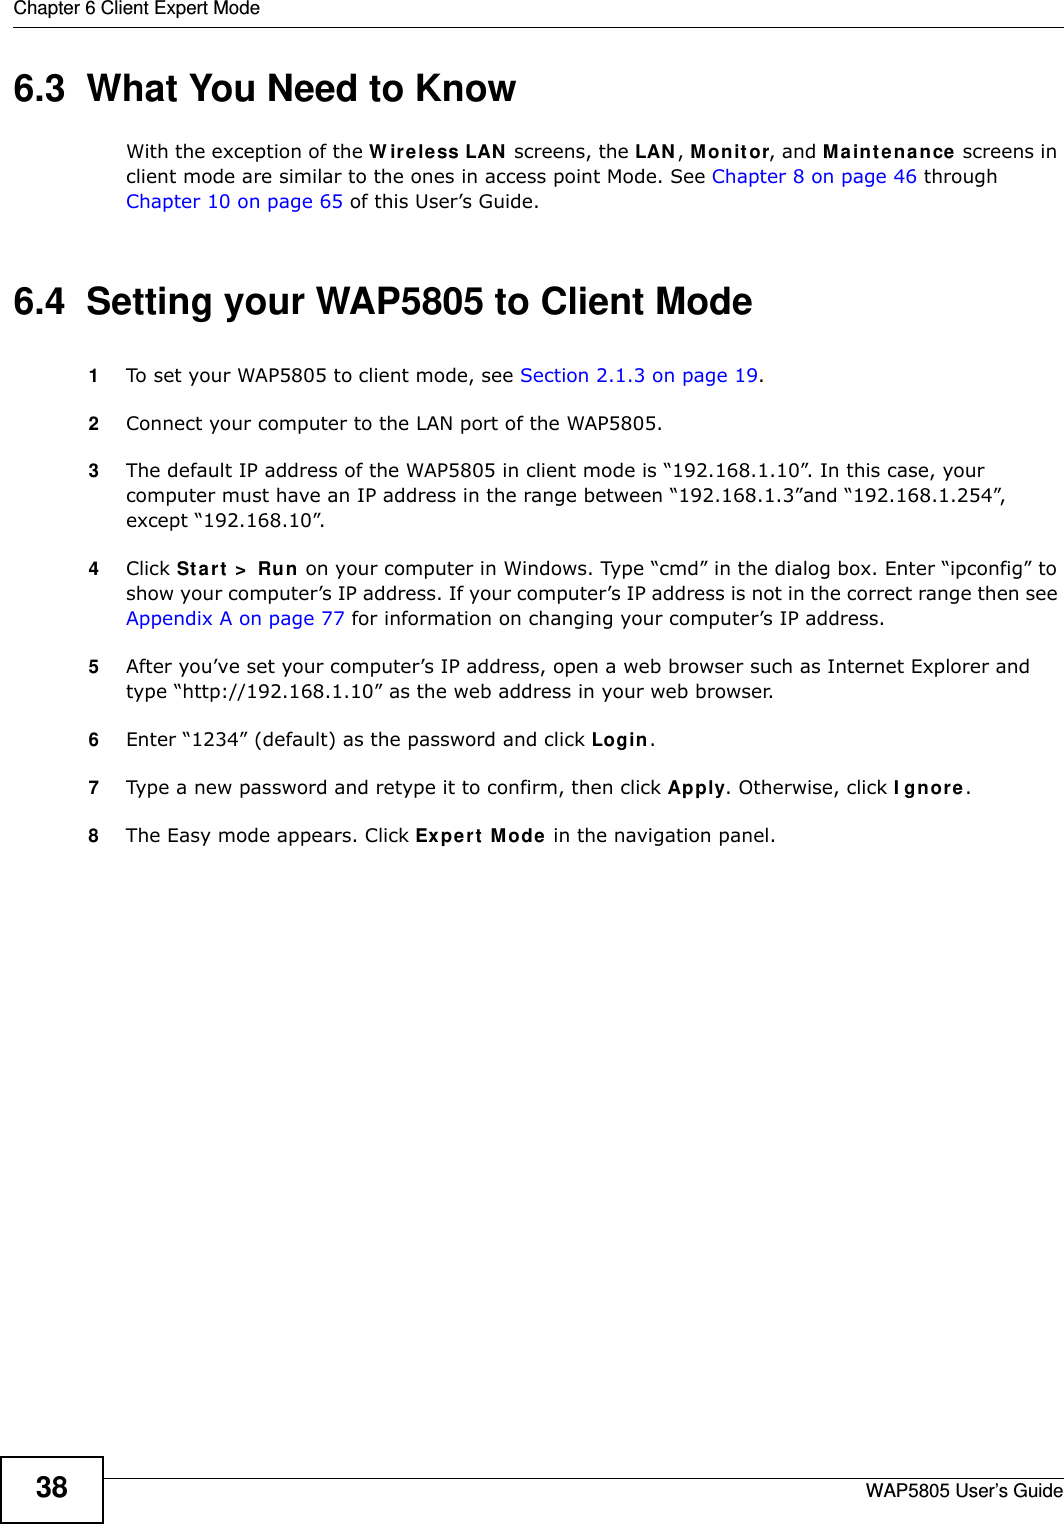 Chapter 6 Client Expert ModeWAP5805 User’s Guide386.3  What You Need to KnowWith the exception of the Wireless LAN screens, the LAN, Monitor, and Maintenance screens in client mode are similar to the ones in access point Mode. See Chapter 8 on page 46 through Chapter 10 on page 65 of this User’s Guide.6.4  Setting your WAP5805 to Client Mode1To set your WAP5805 to client mode, see Section 2.1.3 on page 19.2Connect your computer to the LAN port of the WAP5805. 3The default IP address of the WAP5805 in client mode is “192.168.1.10”. In this case, your computer must have an IP address in the range between “192.168.1.3”and “192.168.1.254”, except “192.168.10”.4Click Start &gt; Run on your computer in Windows. Type “cmd” in the dialog box. Enter “ipconfig” to show your computer’s IP address. If your computer’s IP address is not in the correct range then see Appendix A on page 77 for information on changing your computer’s IP address.5After you’ve set your computer’s IP address, open a web browser such as Internet Explorer and type “http://192.168.1.10” as the web address in your web browser.6Enter “1234” (default) as the password and click Login.7Type a new password and retype it to confirm, then click Apply. Otherwise, click Ignore.8The Easy mode appears. Click Expert Mode in the navigation panel.